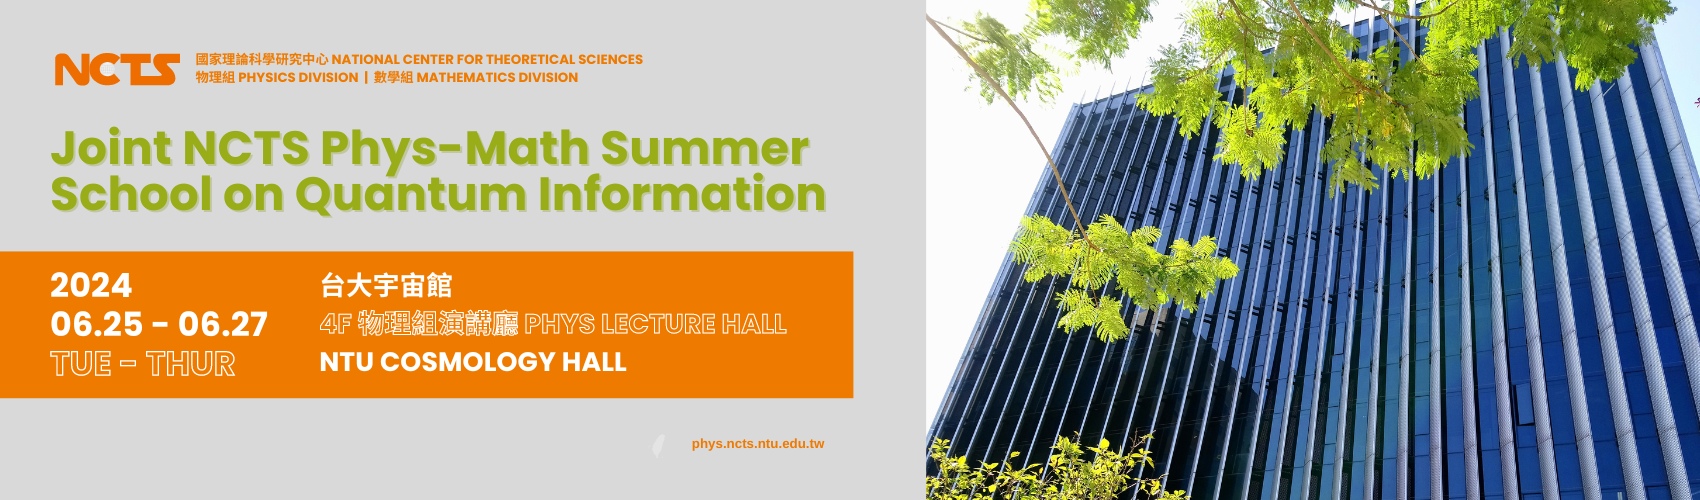 Joint NCTS Phys-Math Summer School on Quantum Information